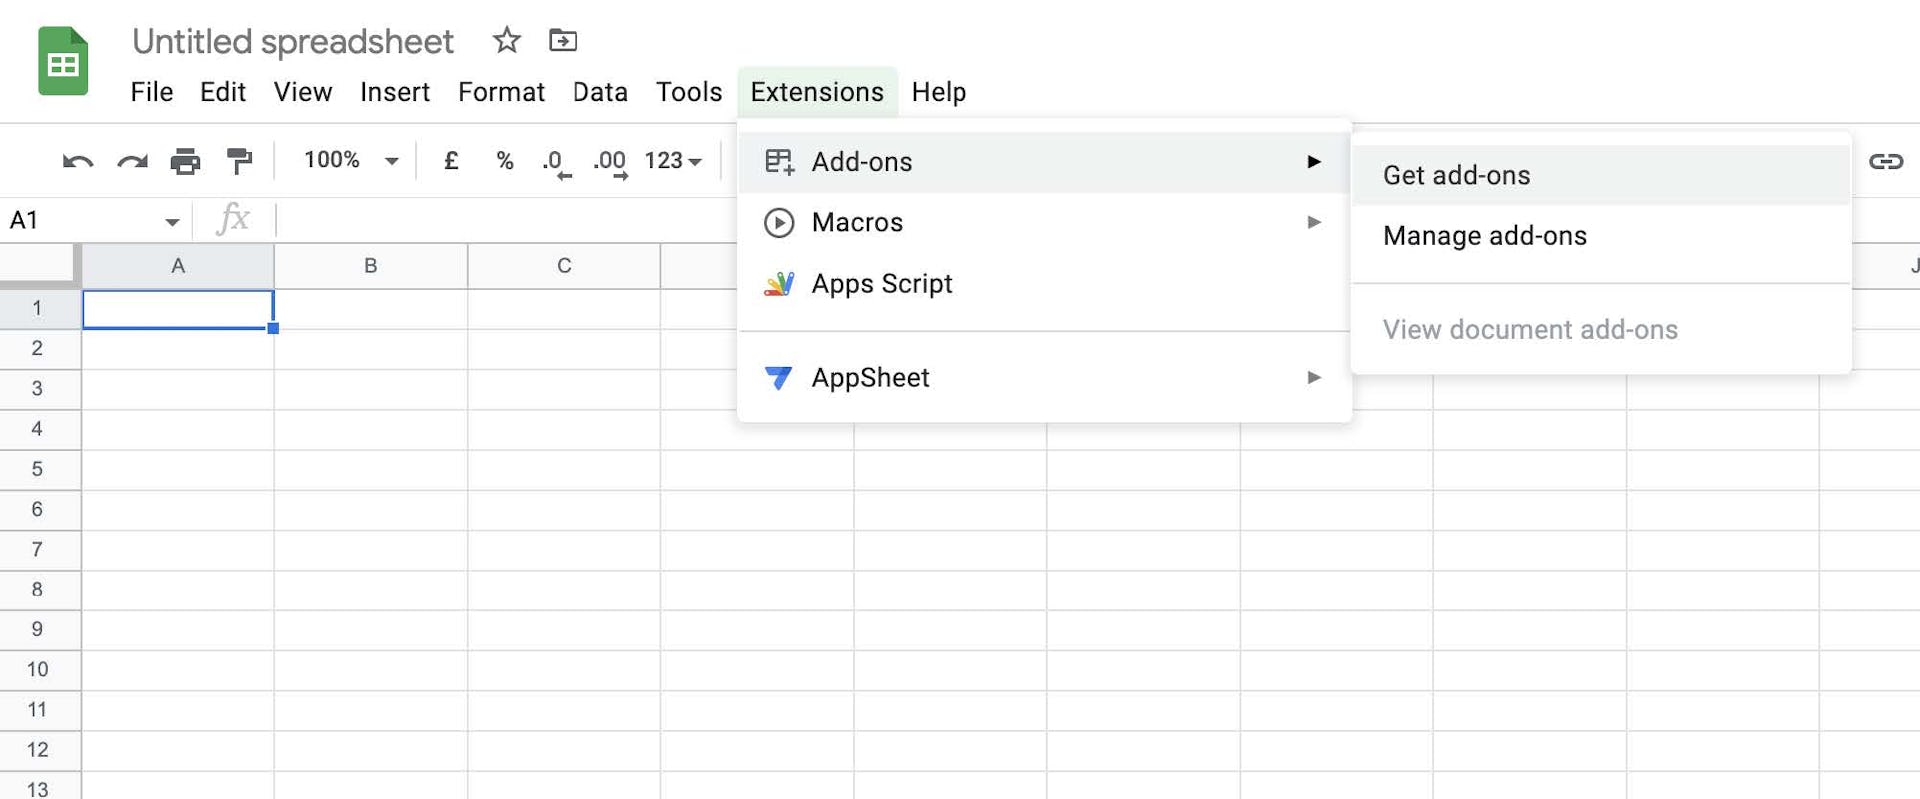 A screenshot of Google Sheets with the Add-ons menu pane open